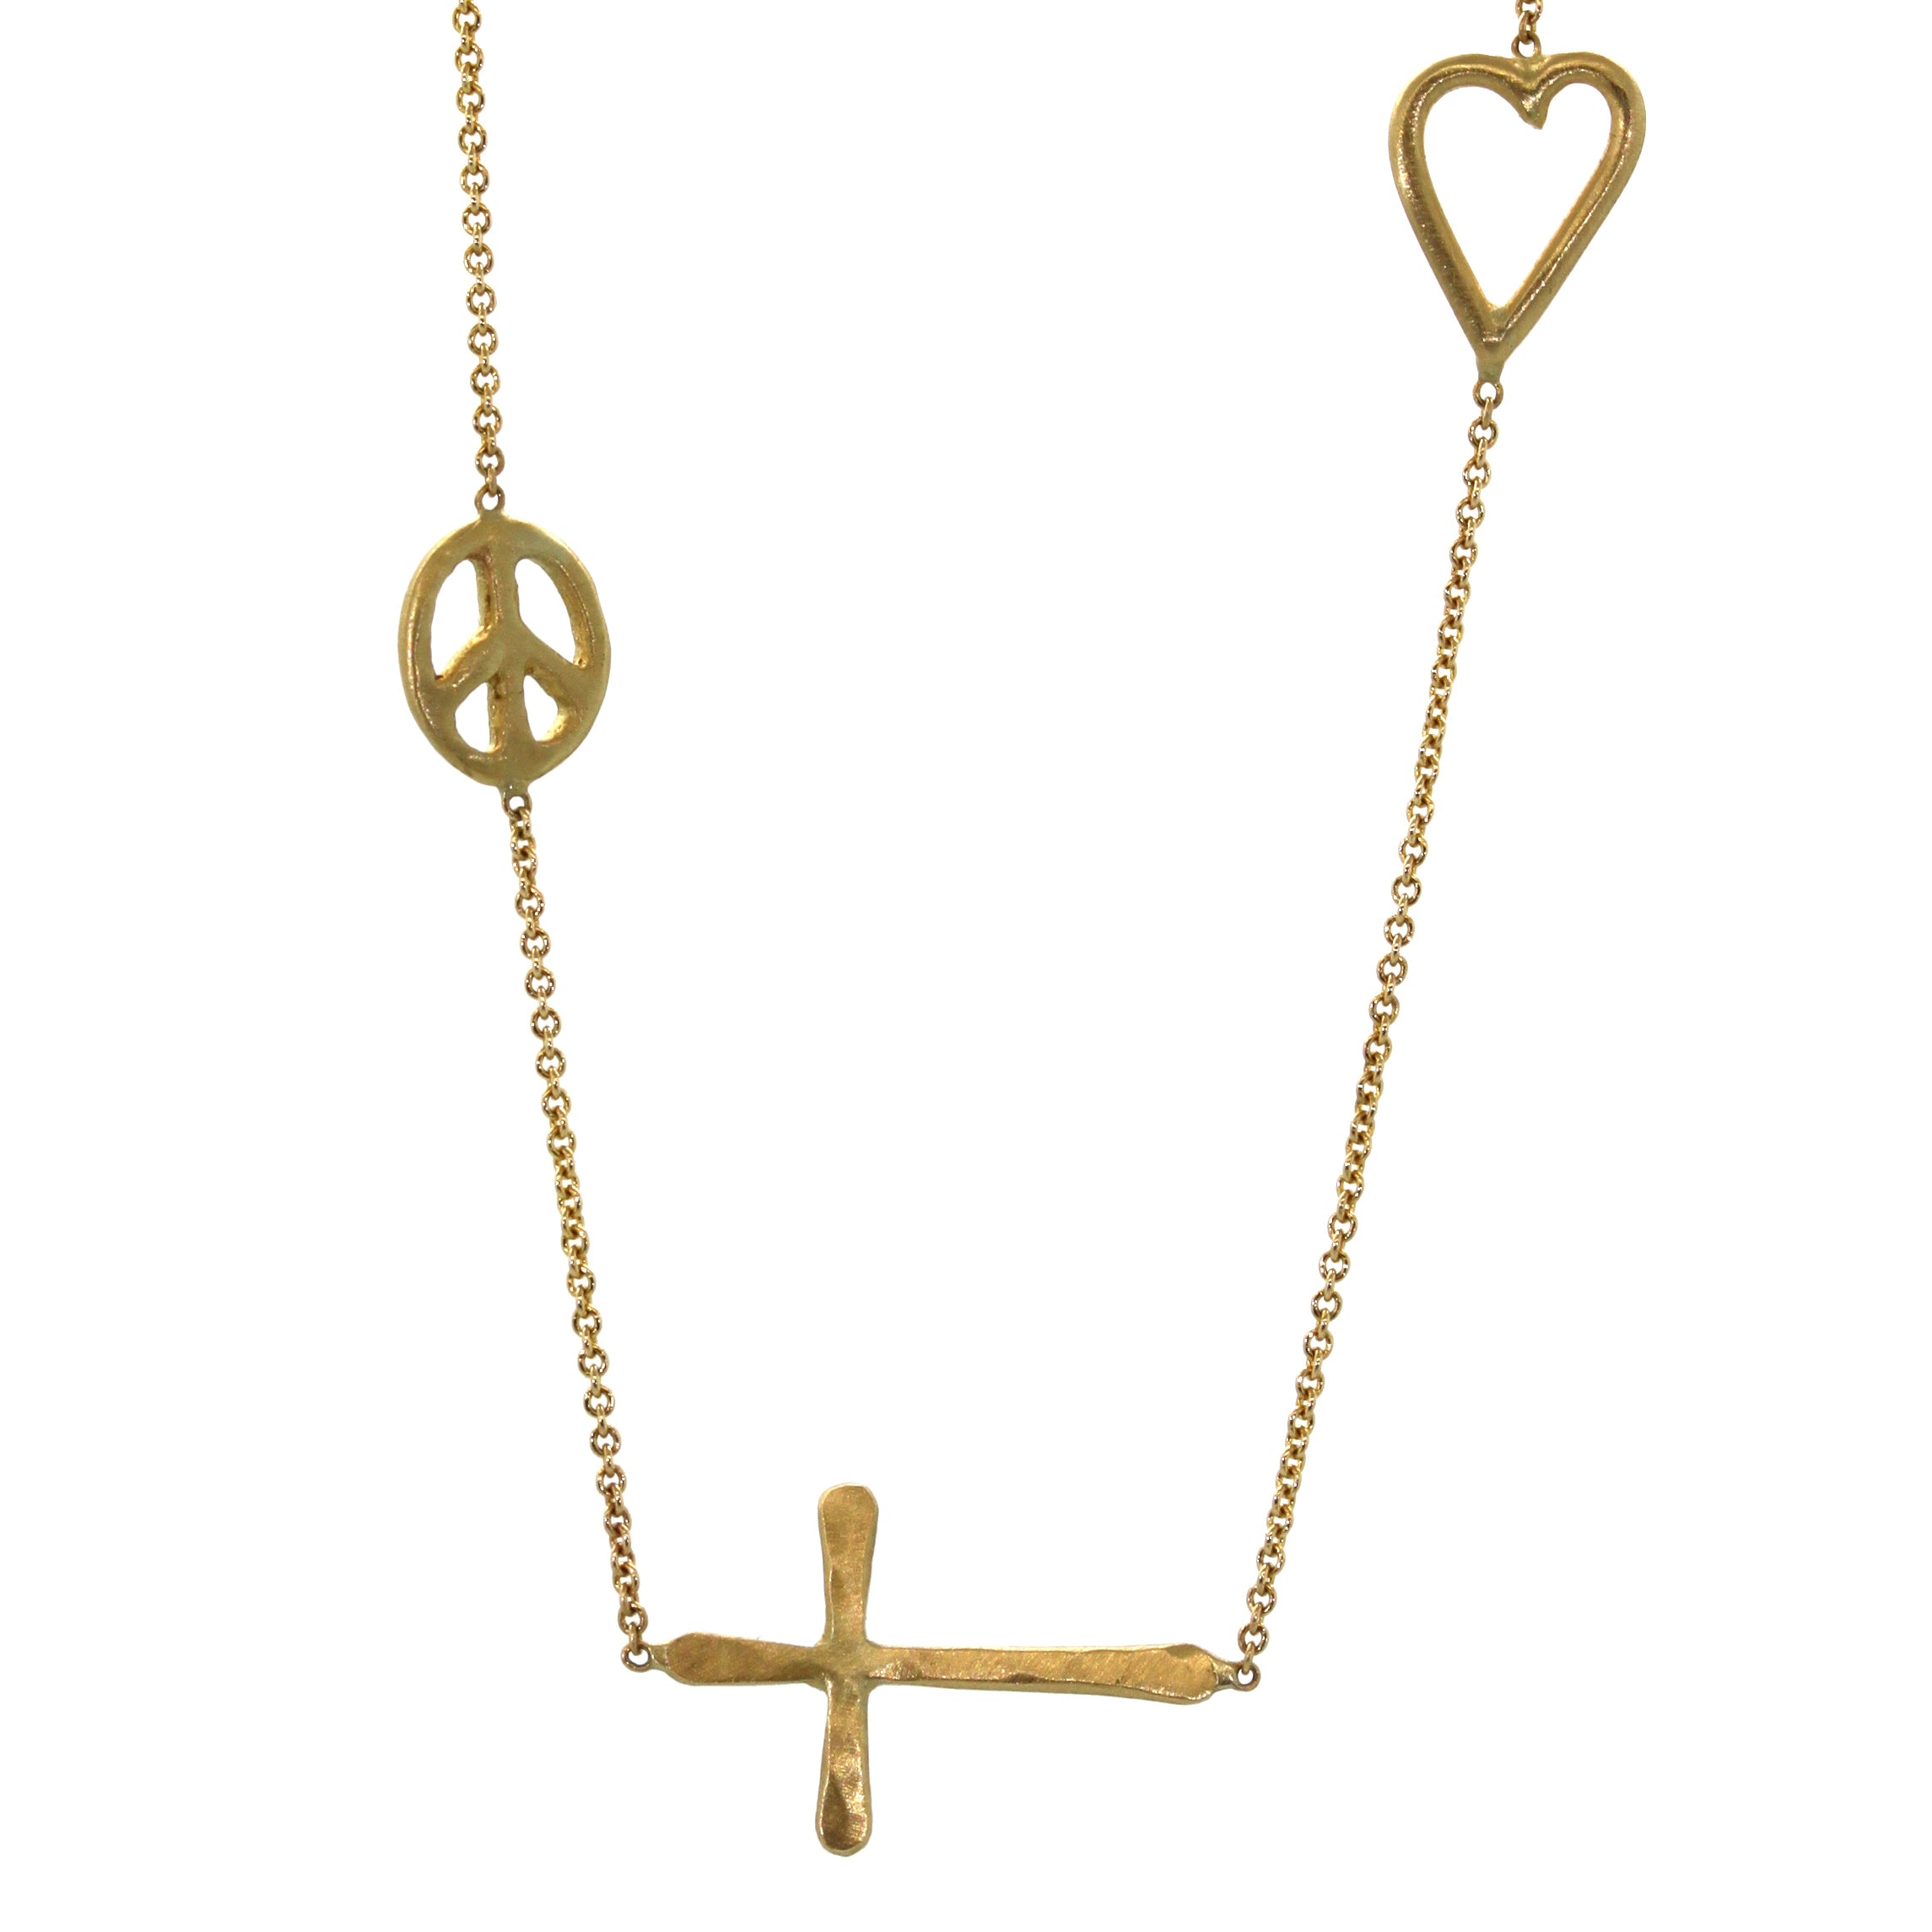 This Peace, Faith, Love Necklace features a handmade yellow gold peace sign, small heart, and sideways cross all soldered into a yellow gold chain. It was handcrafted with precision at studio 703 + RLD in Houston, Texas.